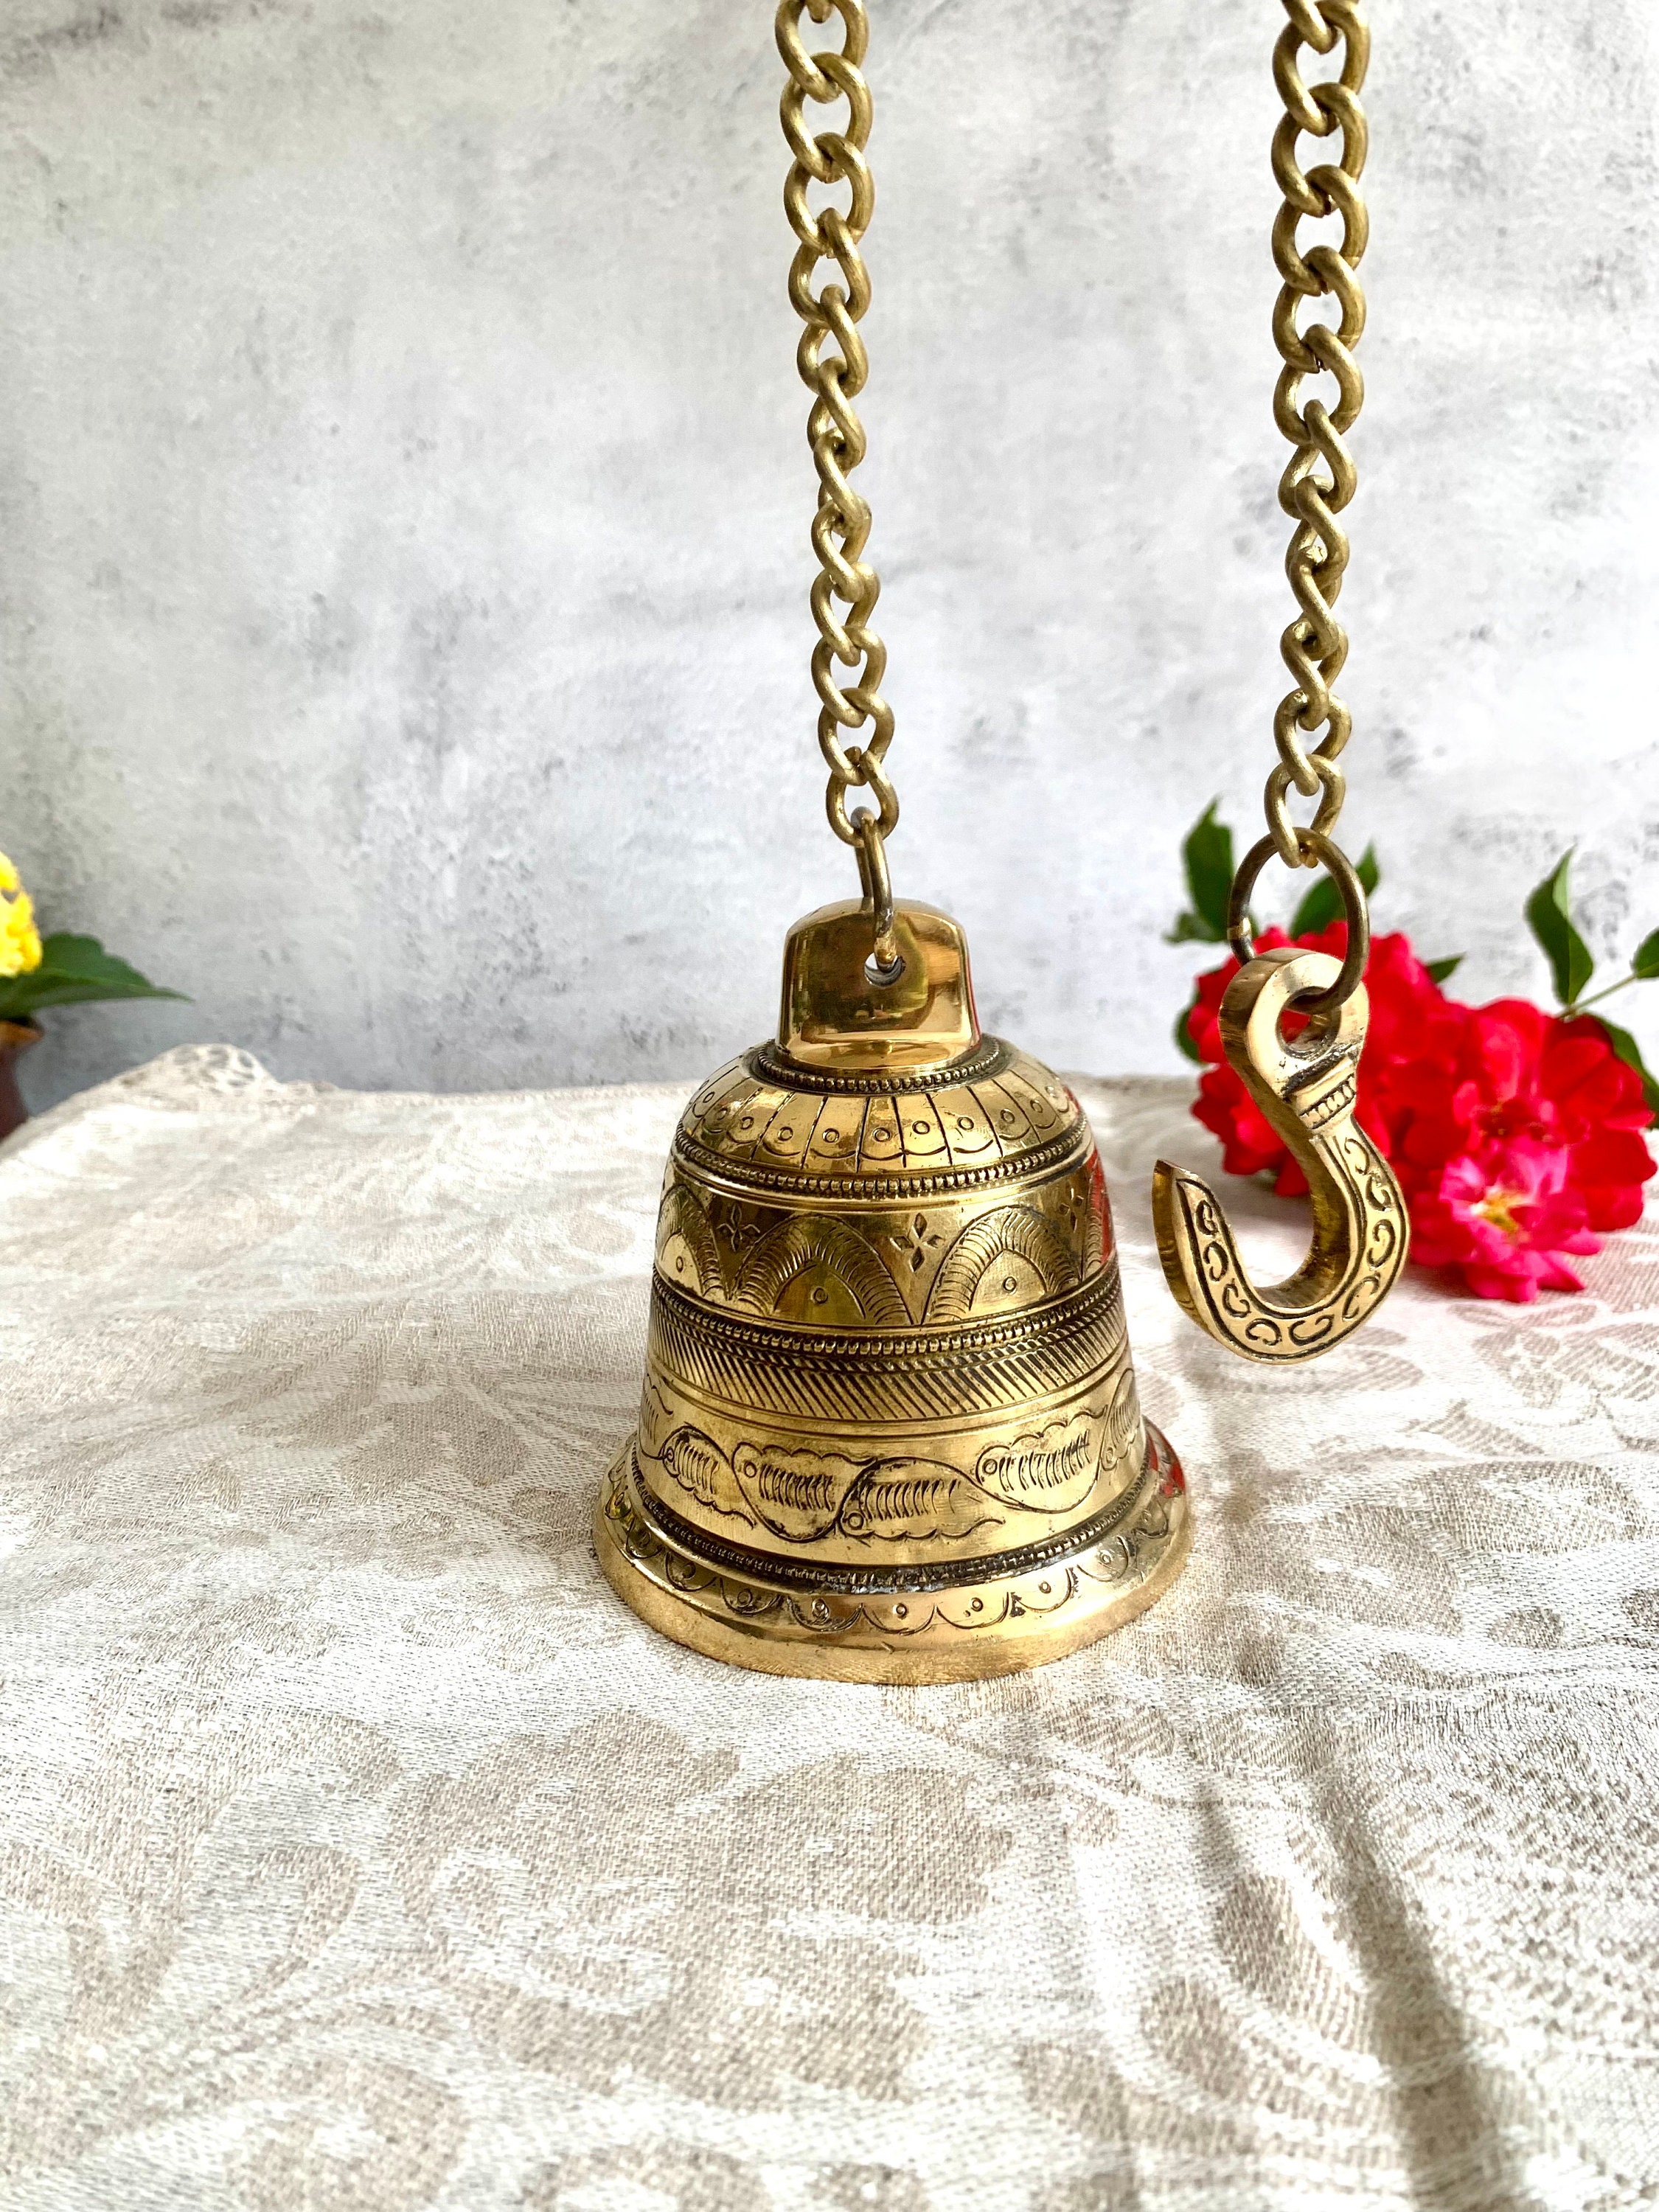 Brass Temple Hanging Bell, Brass Bells for Temple, Indian Home Decor,  Hanging Bell, Indian Homeware, Home Decor India 